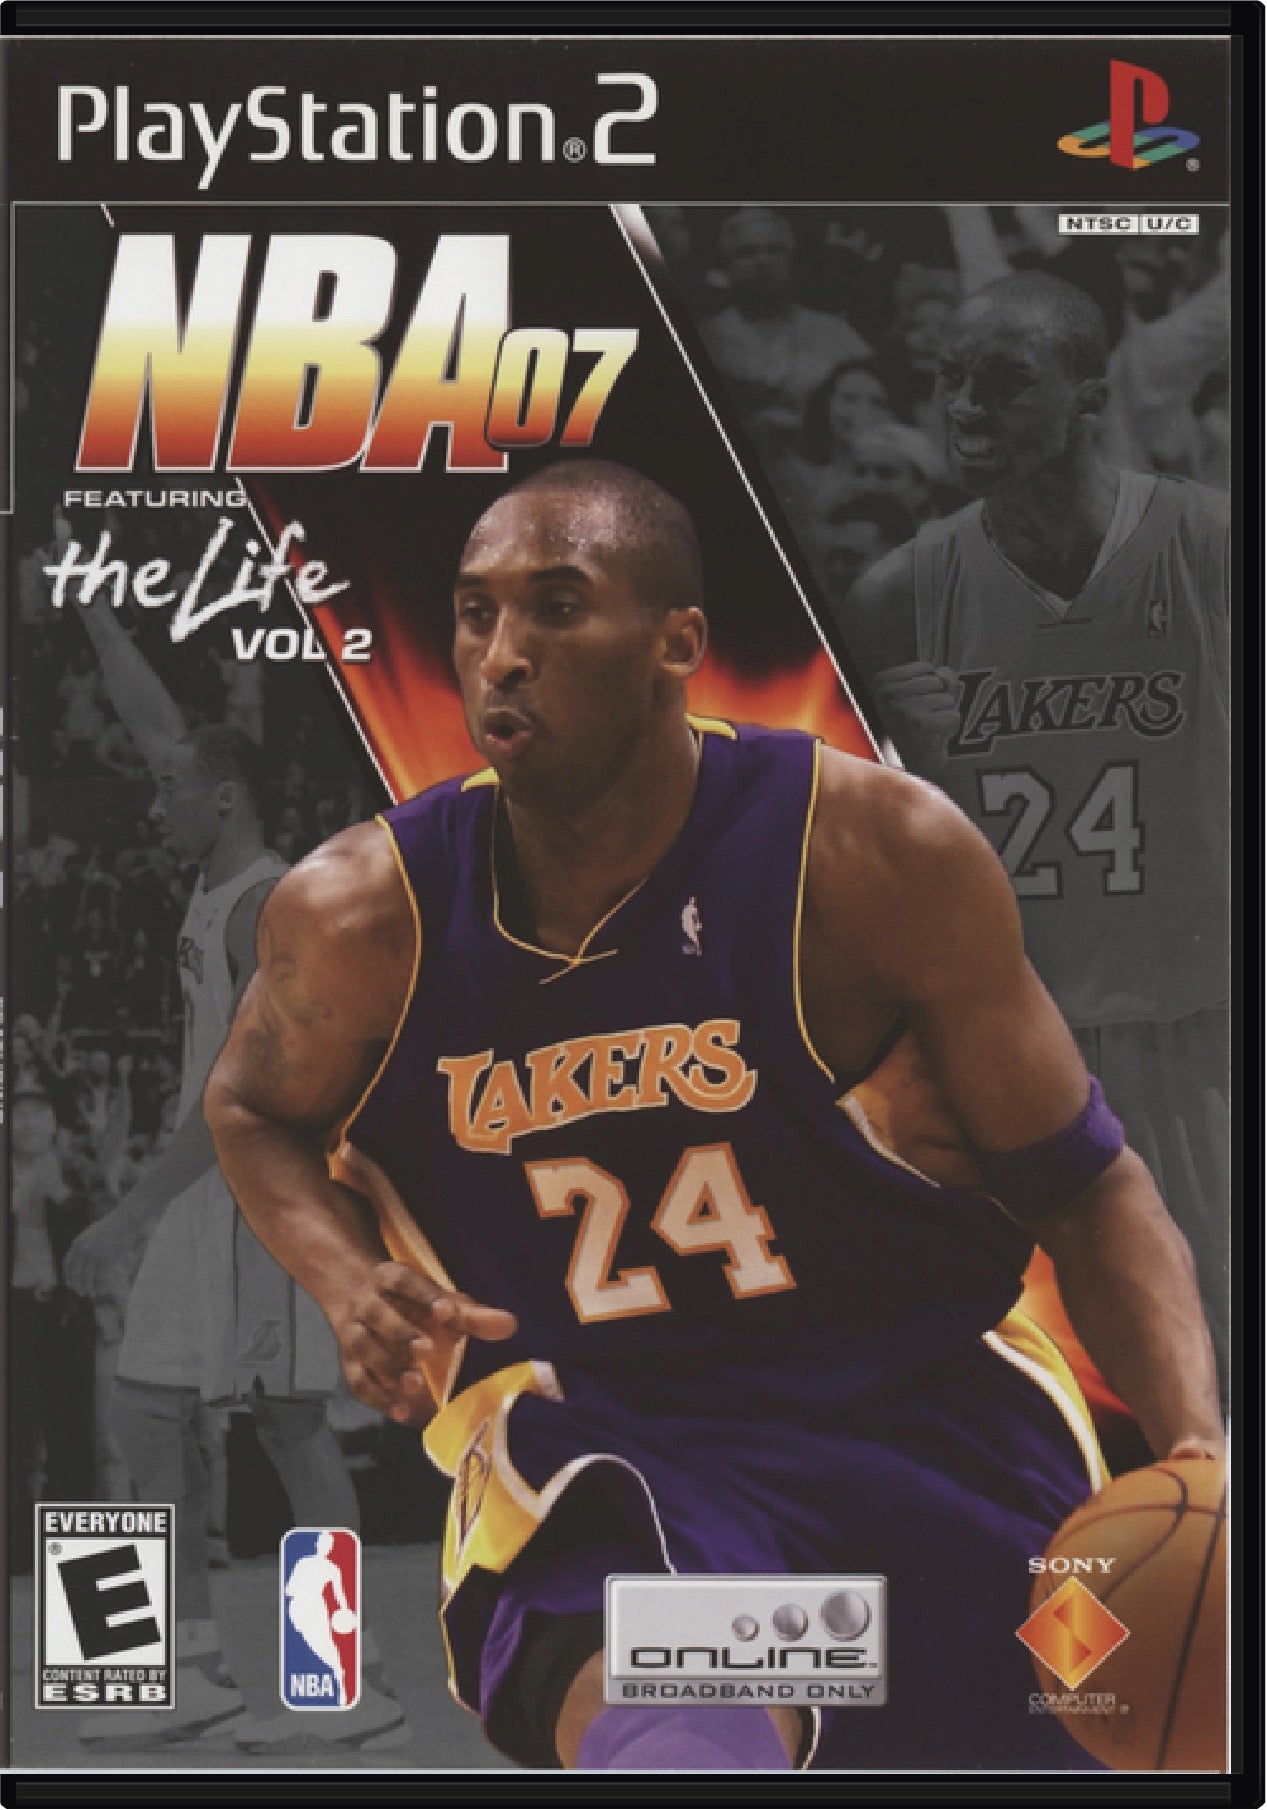 NBA 07 Featuring The Life Vol 2 Cover Art and Product Photo